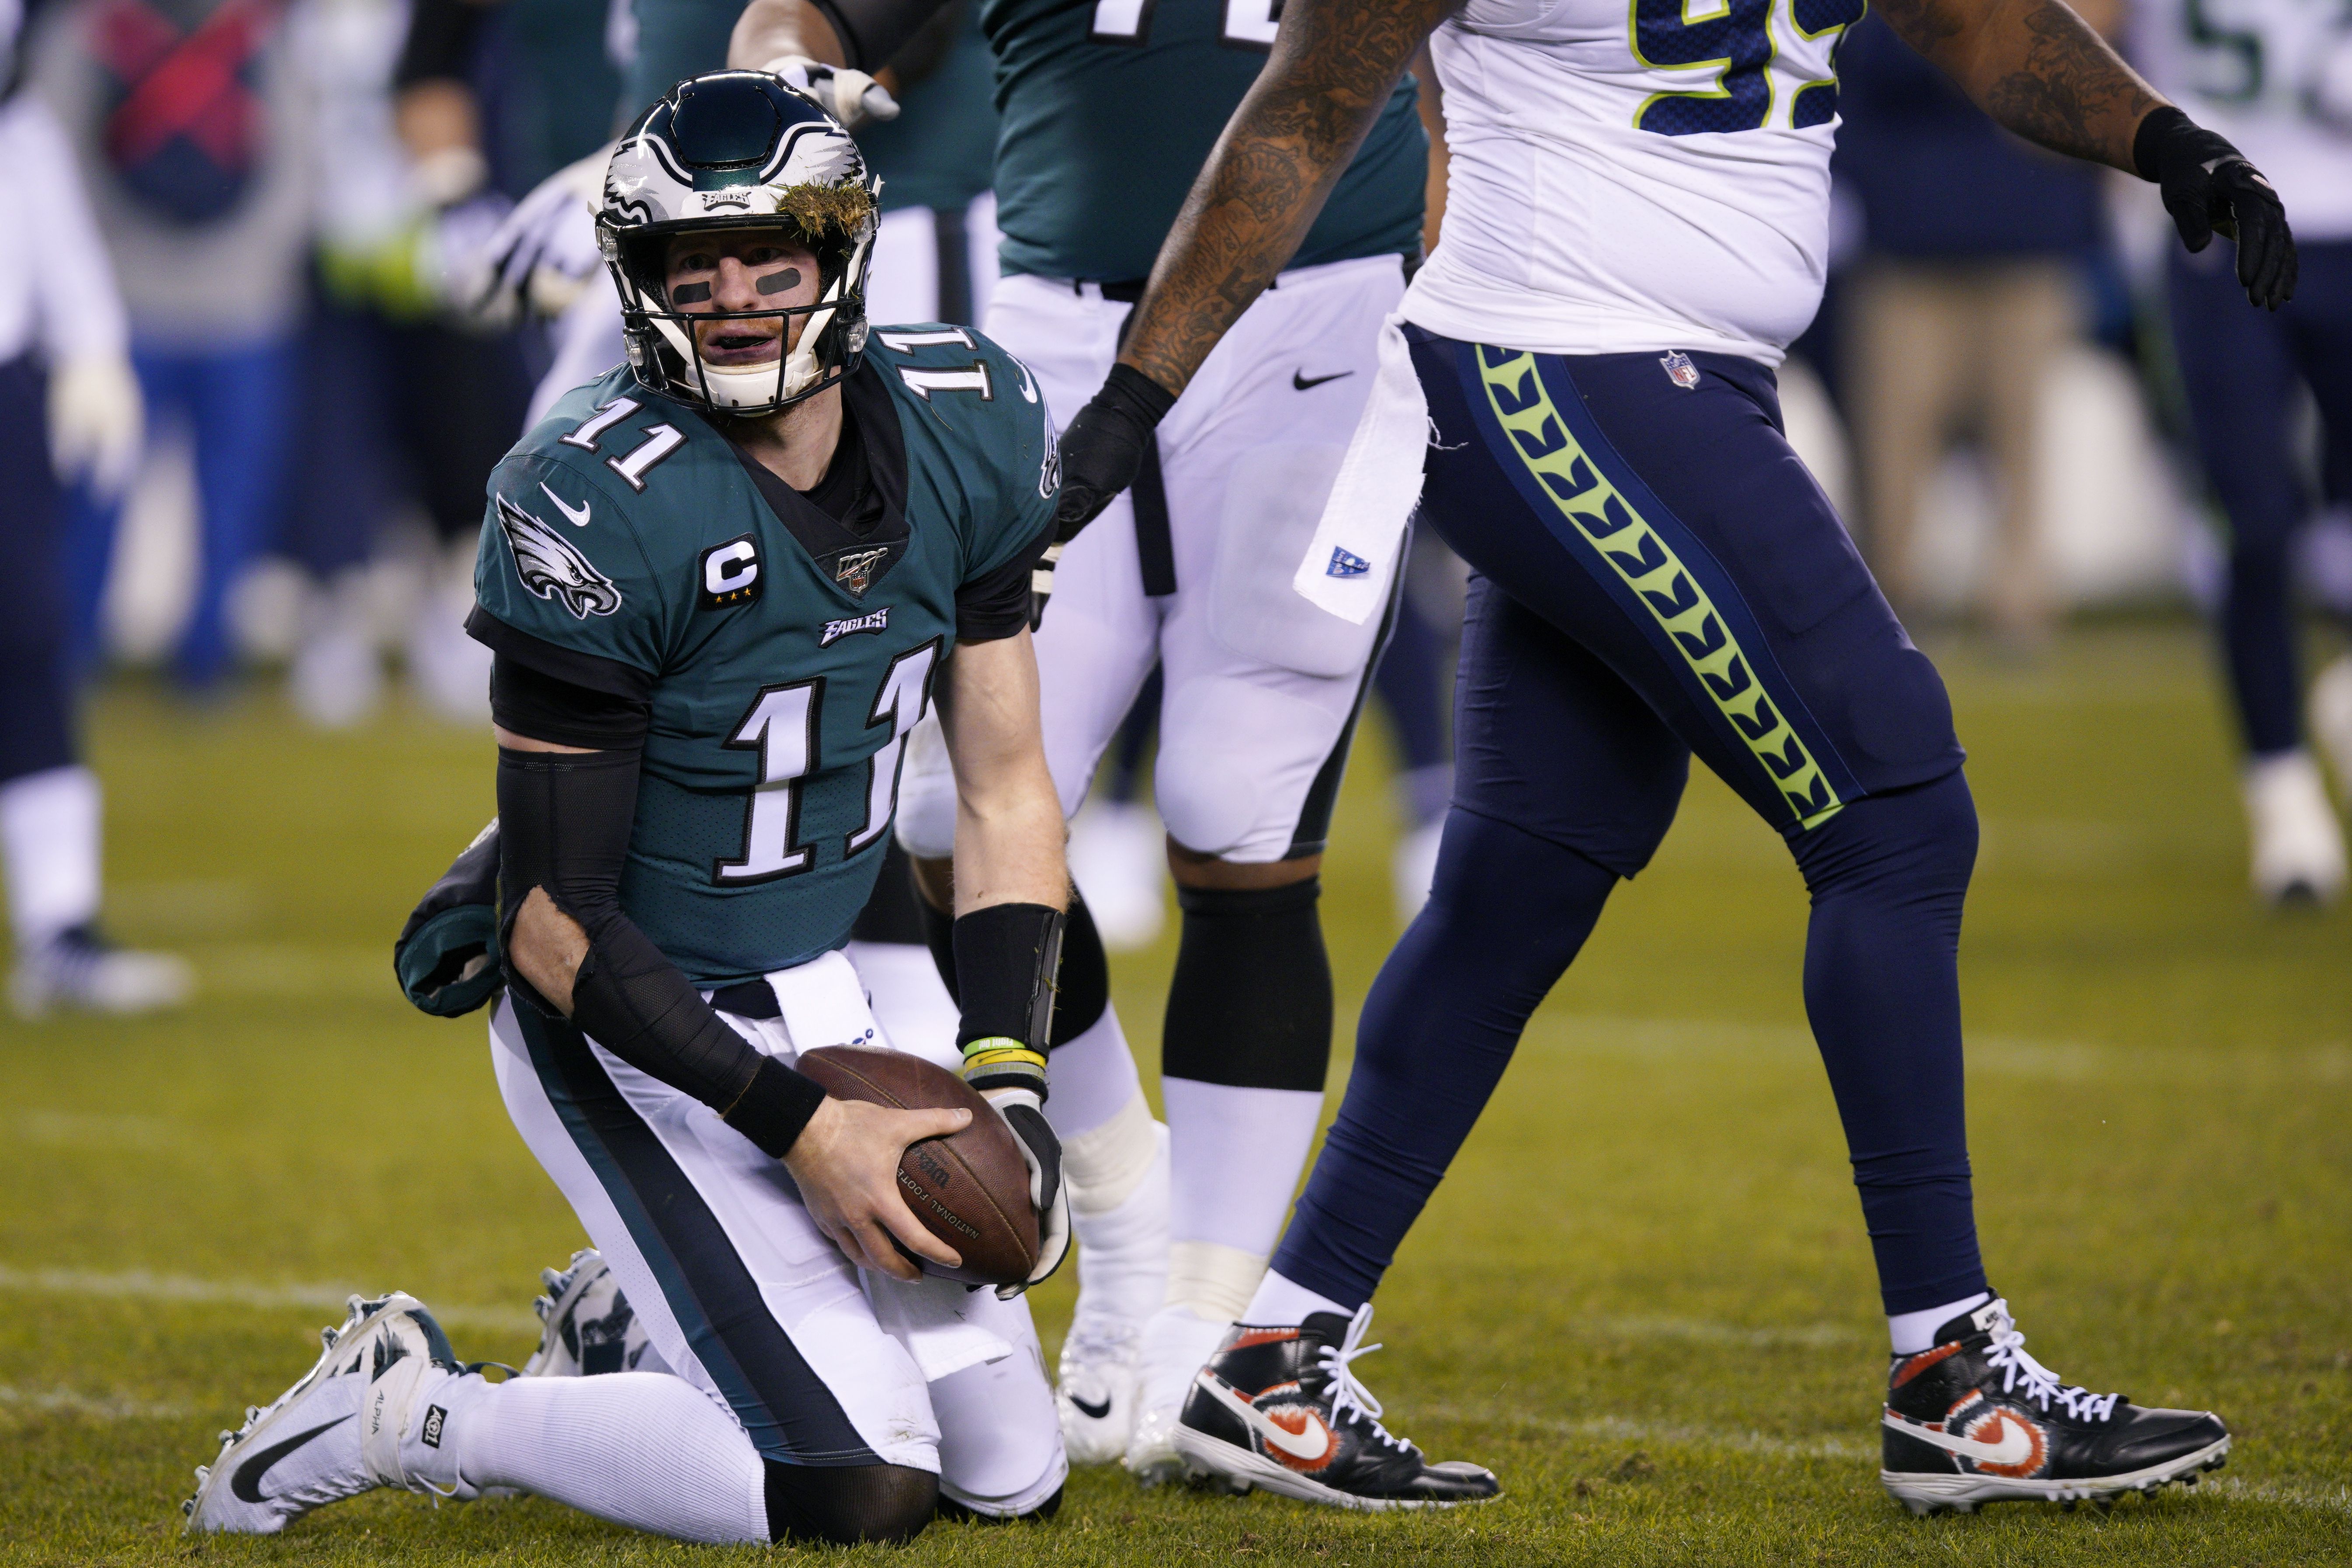 NFL playoffs: Eagles lose to Seahawks 17-9, Josh McCown quarterback after  Carson Wentz concussion in Philadelphia-Seattle